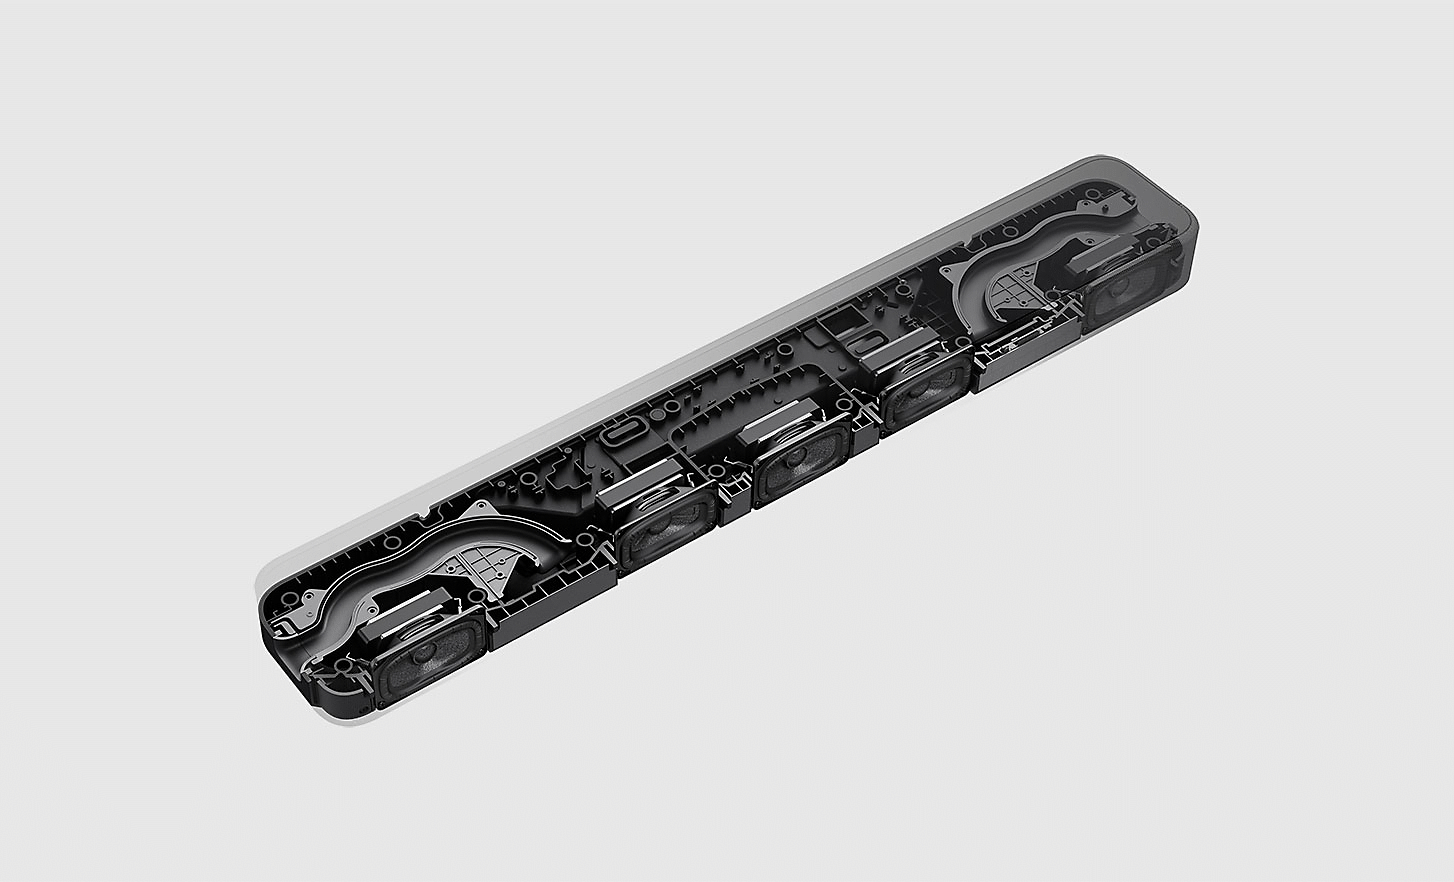 Image of the internal components of the HT-S2000 sound bar